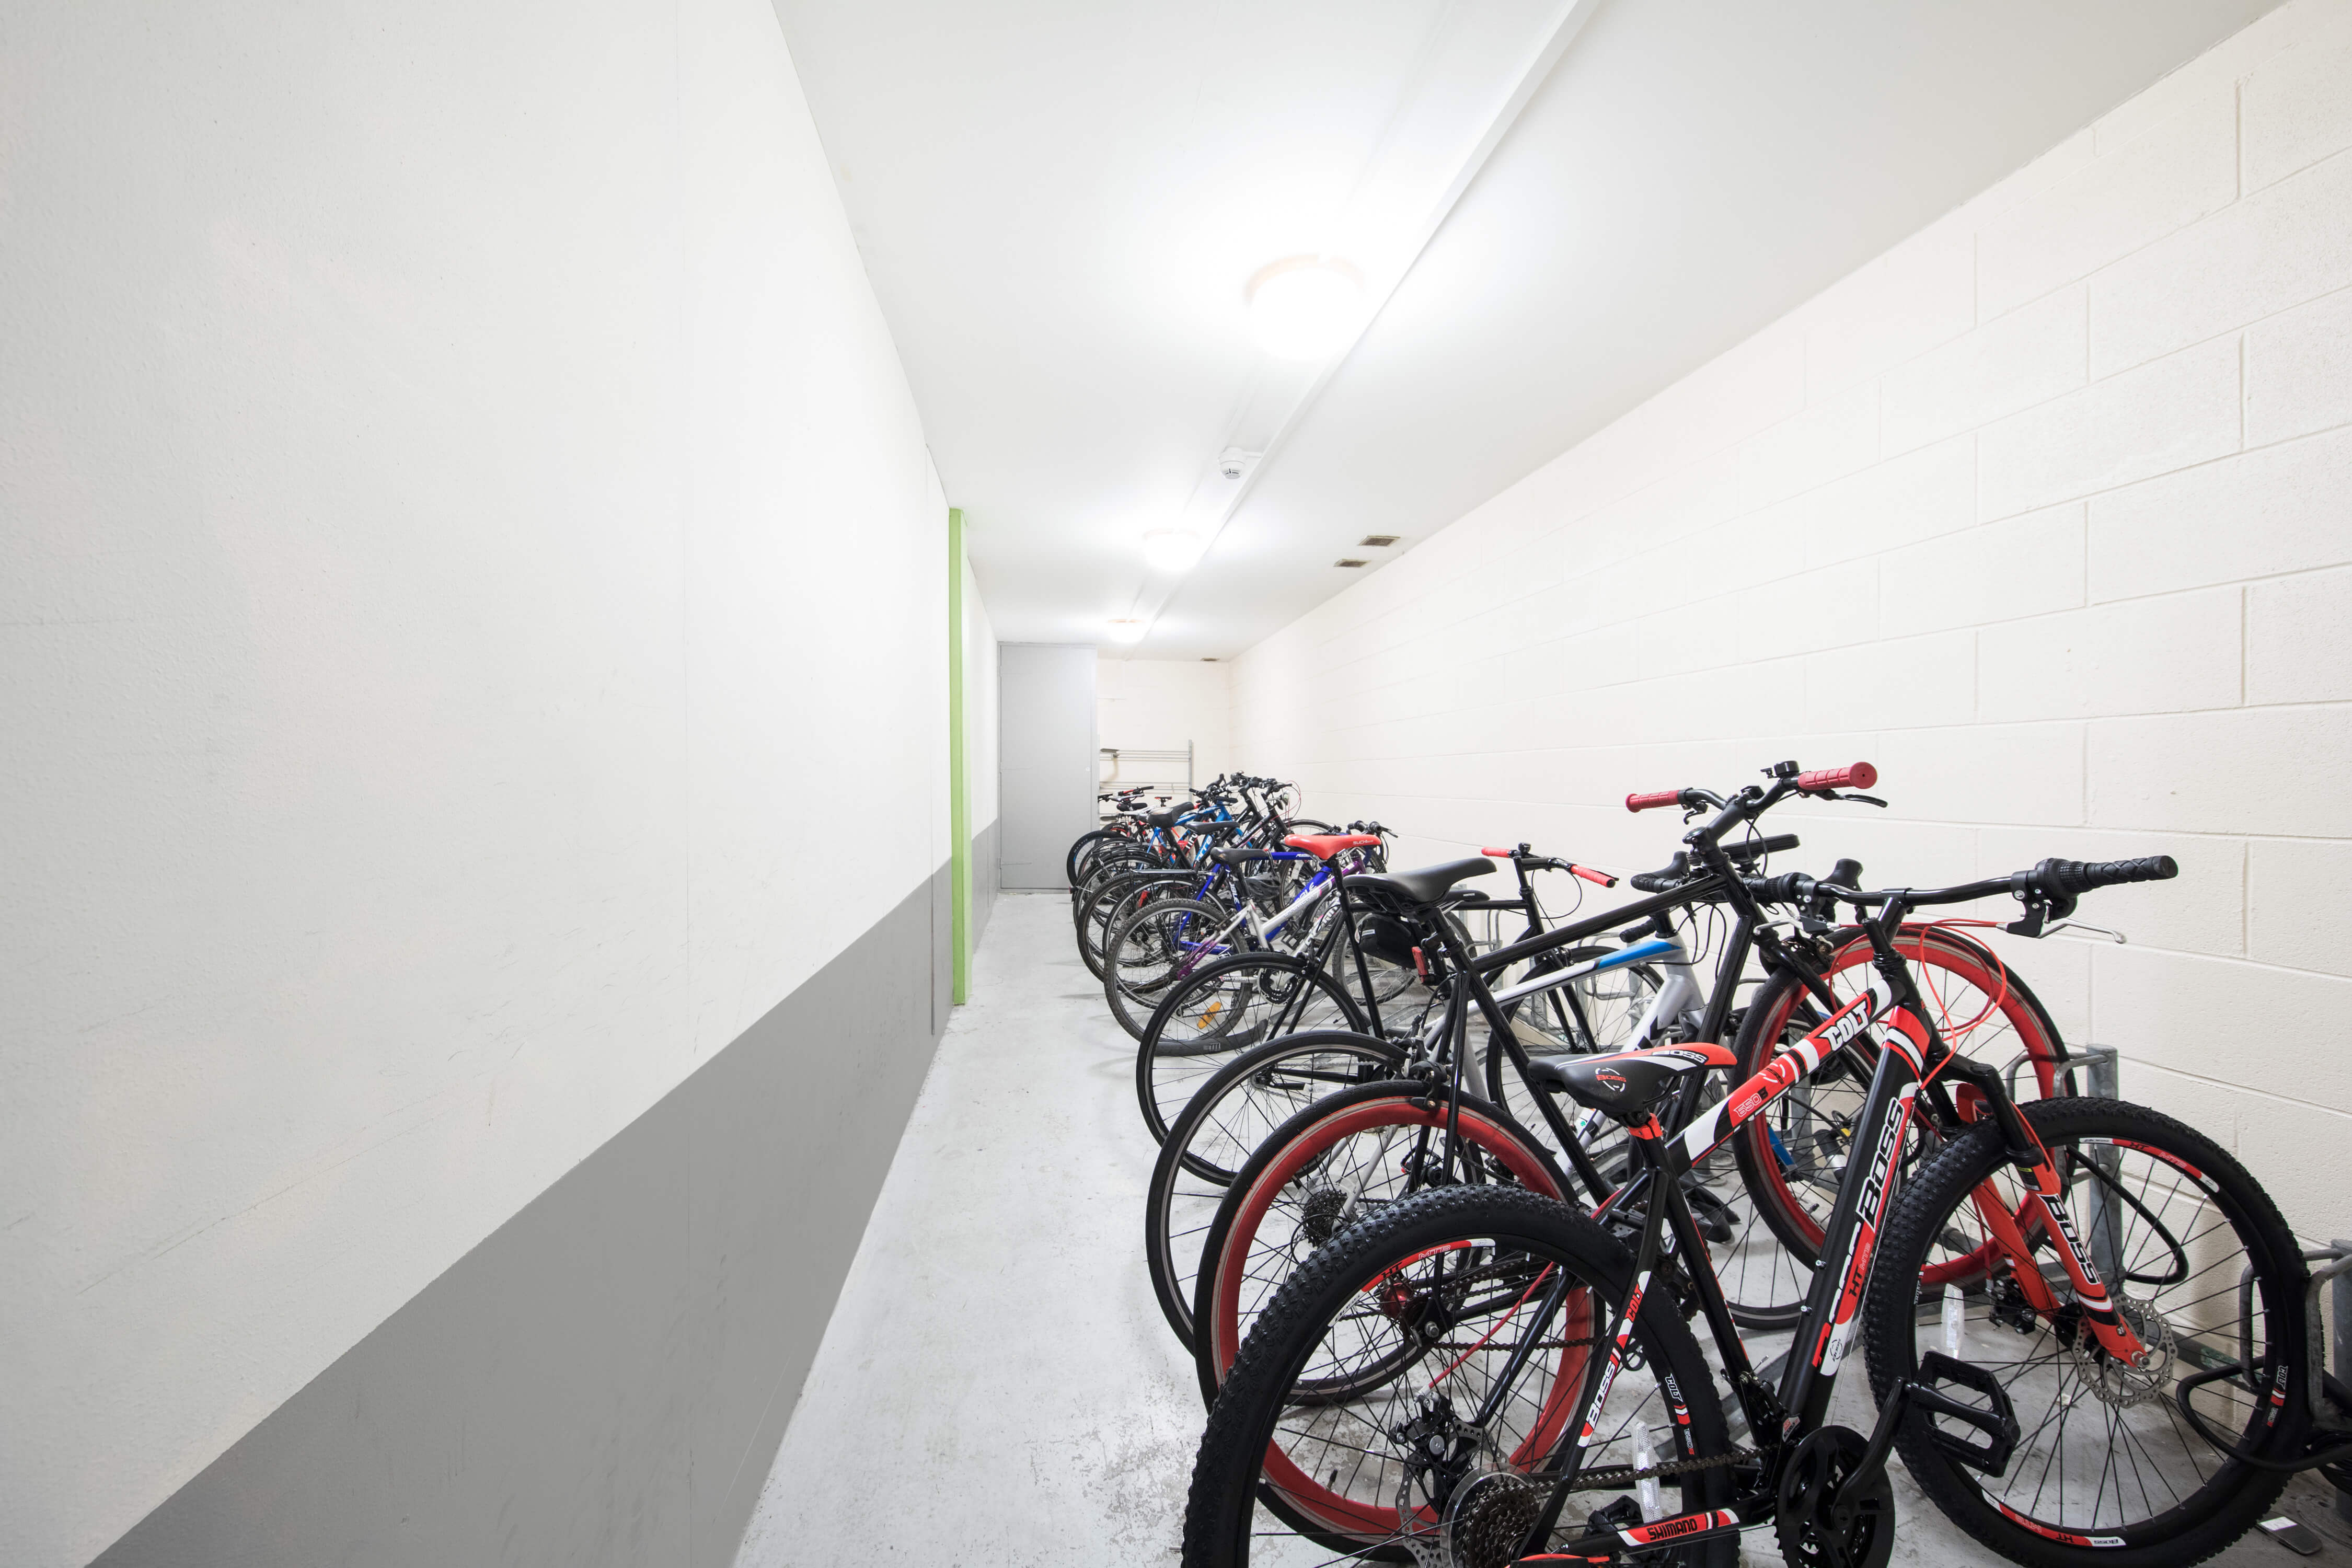 Bikes in a storage room